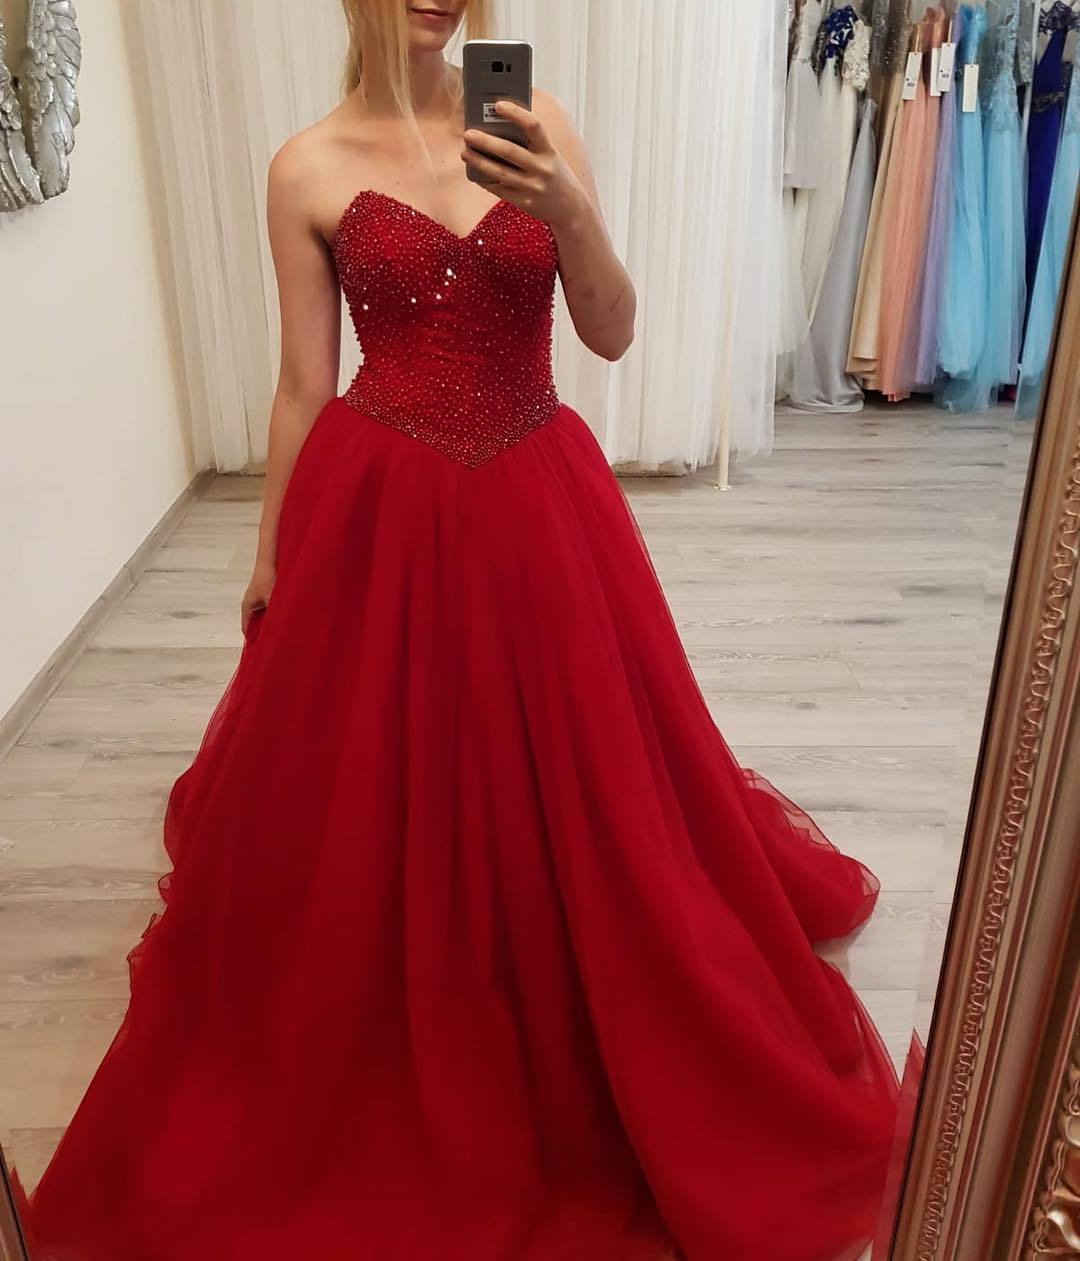 Red Prom Dress Beaded Bodice, Formal Dress, Evening Dress, Pageant Dance Dresses, School Party Gown, PC0770